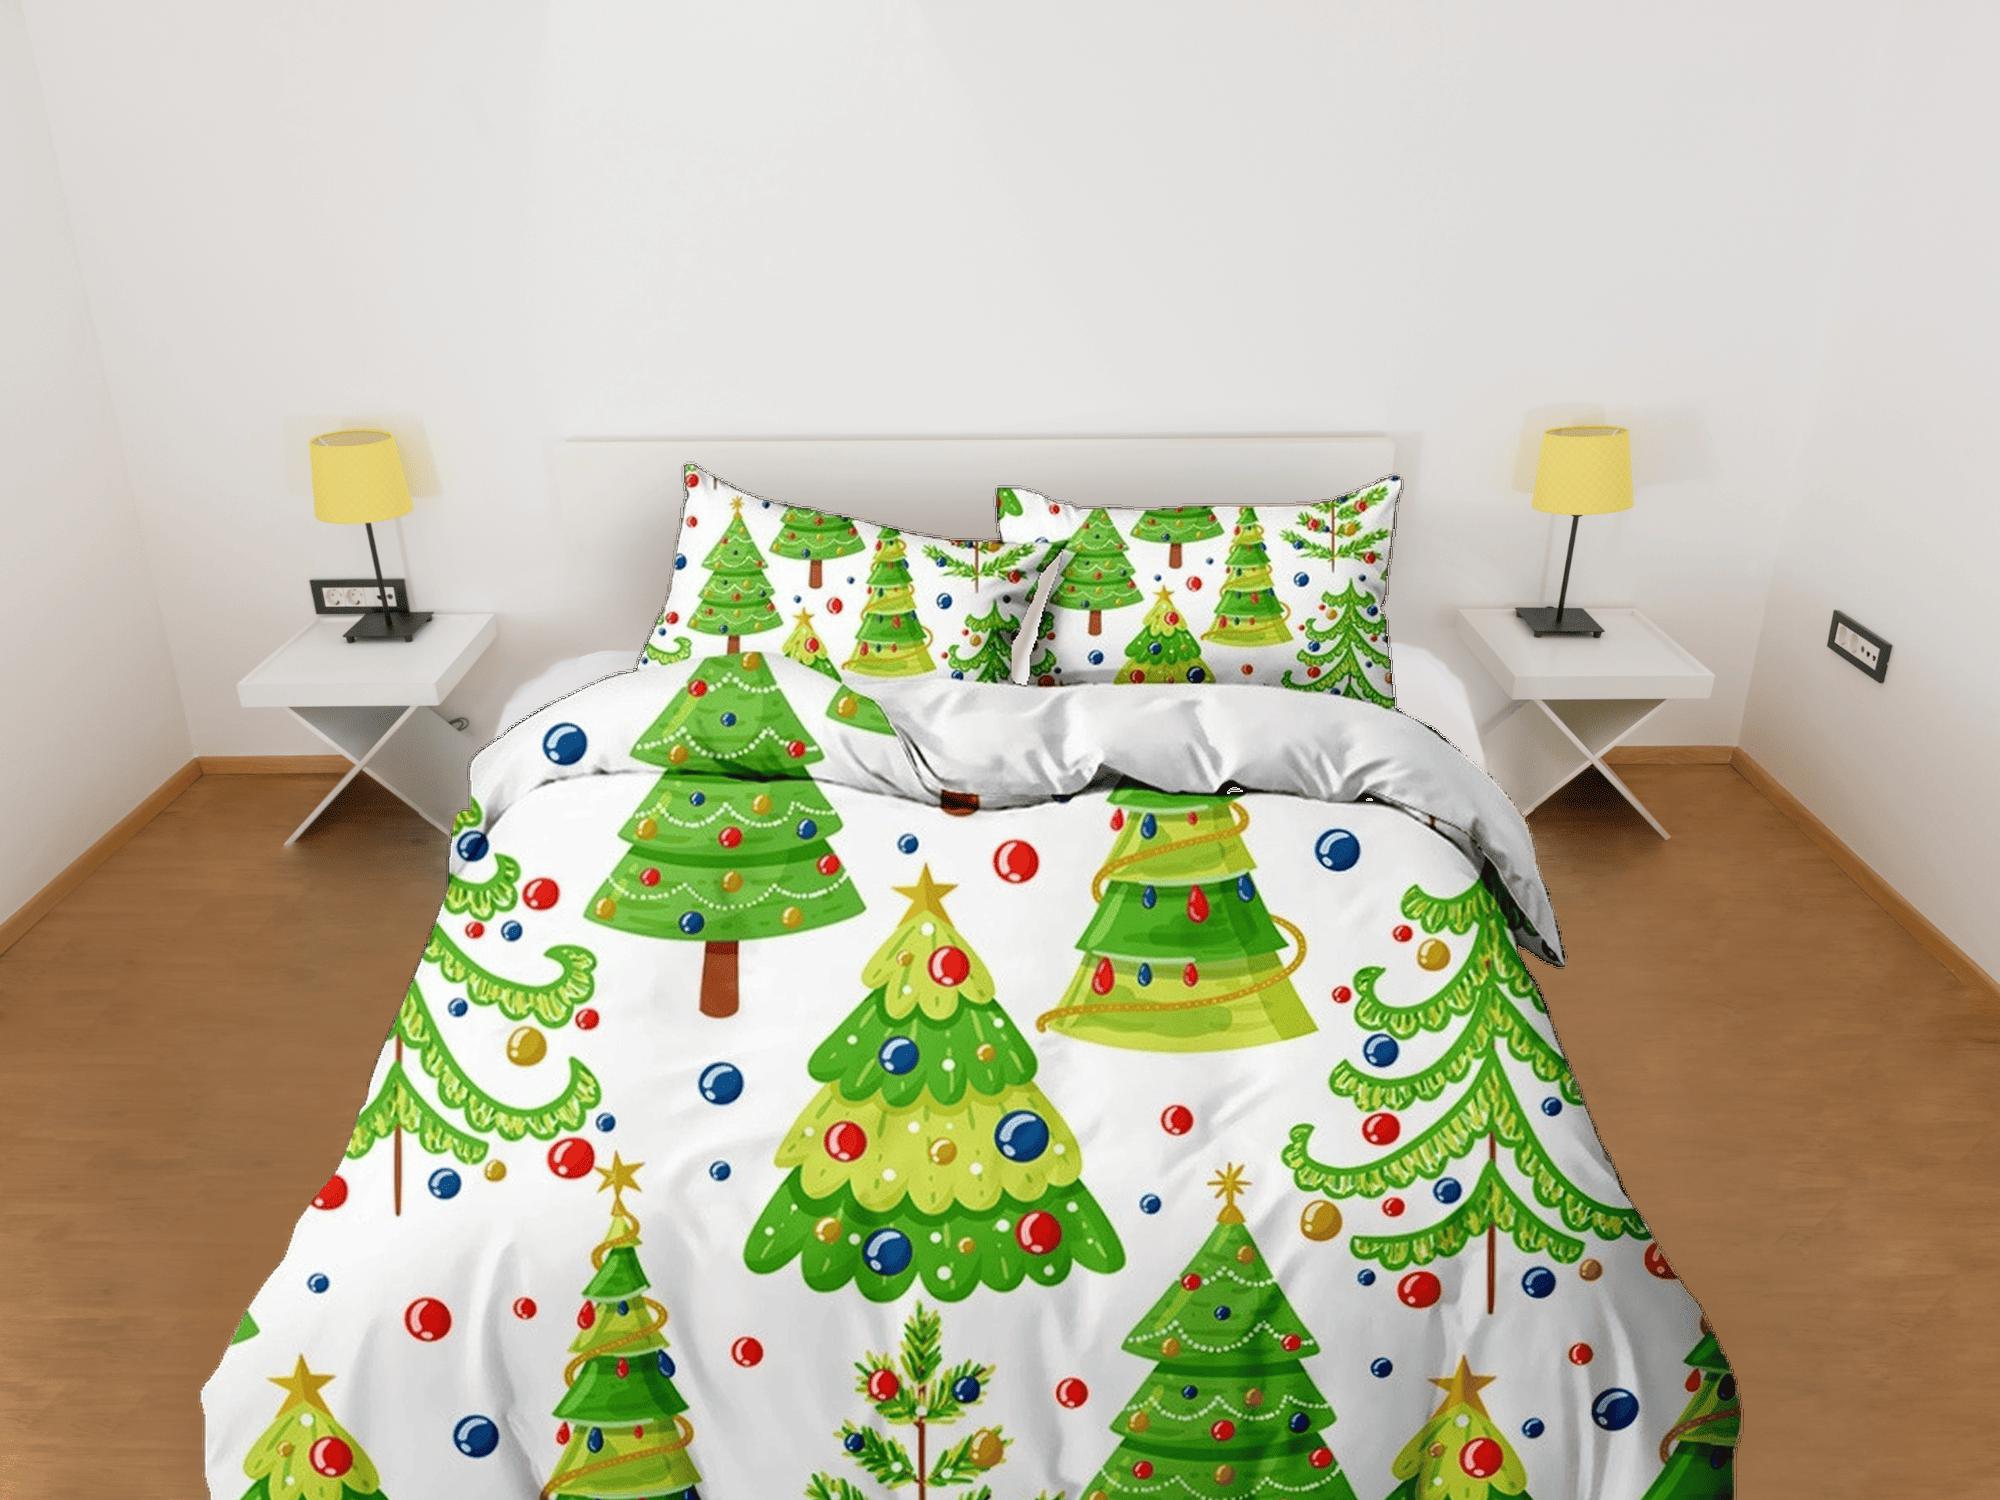 daintyduvet Christmas tree and bauble bedding & pillowcase holiday gift duvet cover king queen full twin toddler bedding baby Christmas farmhouse decor